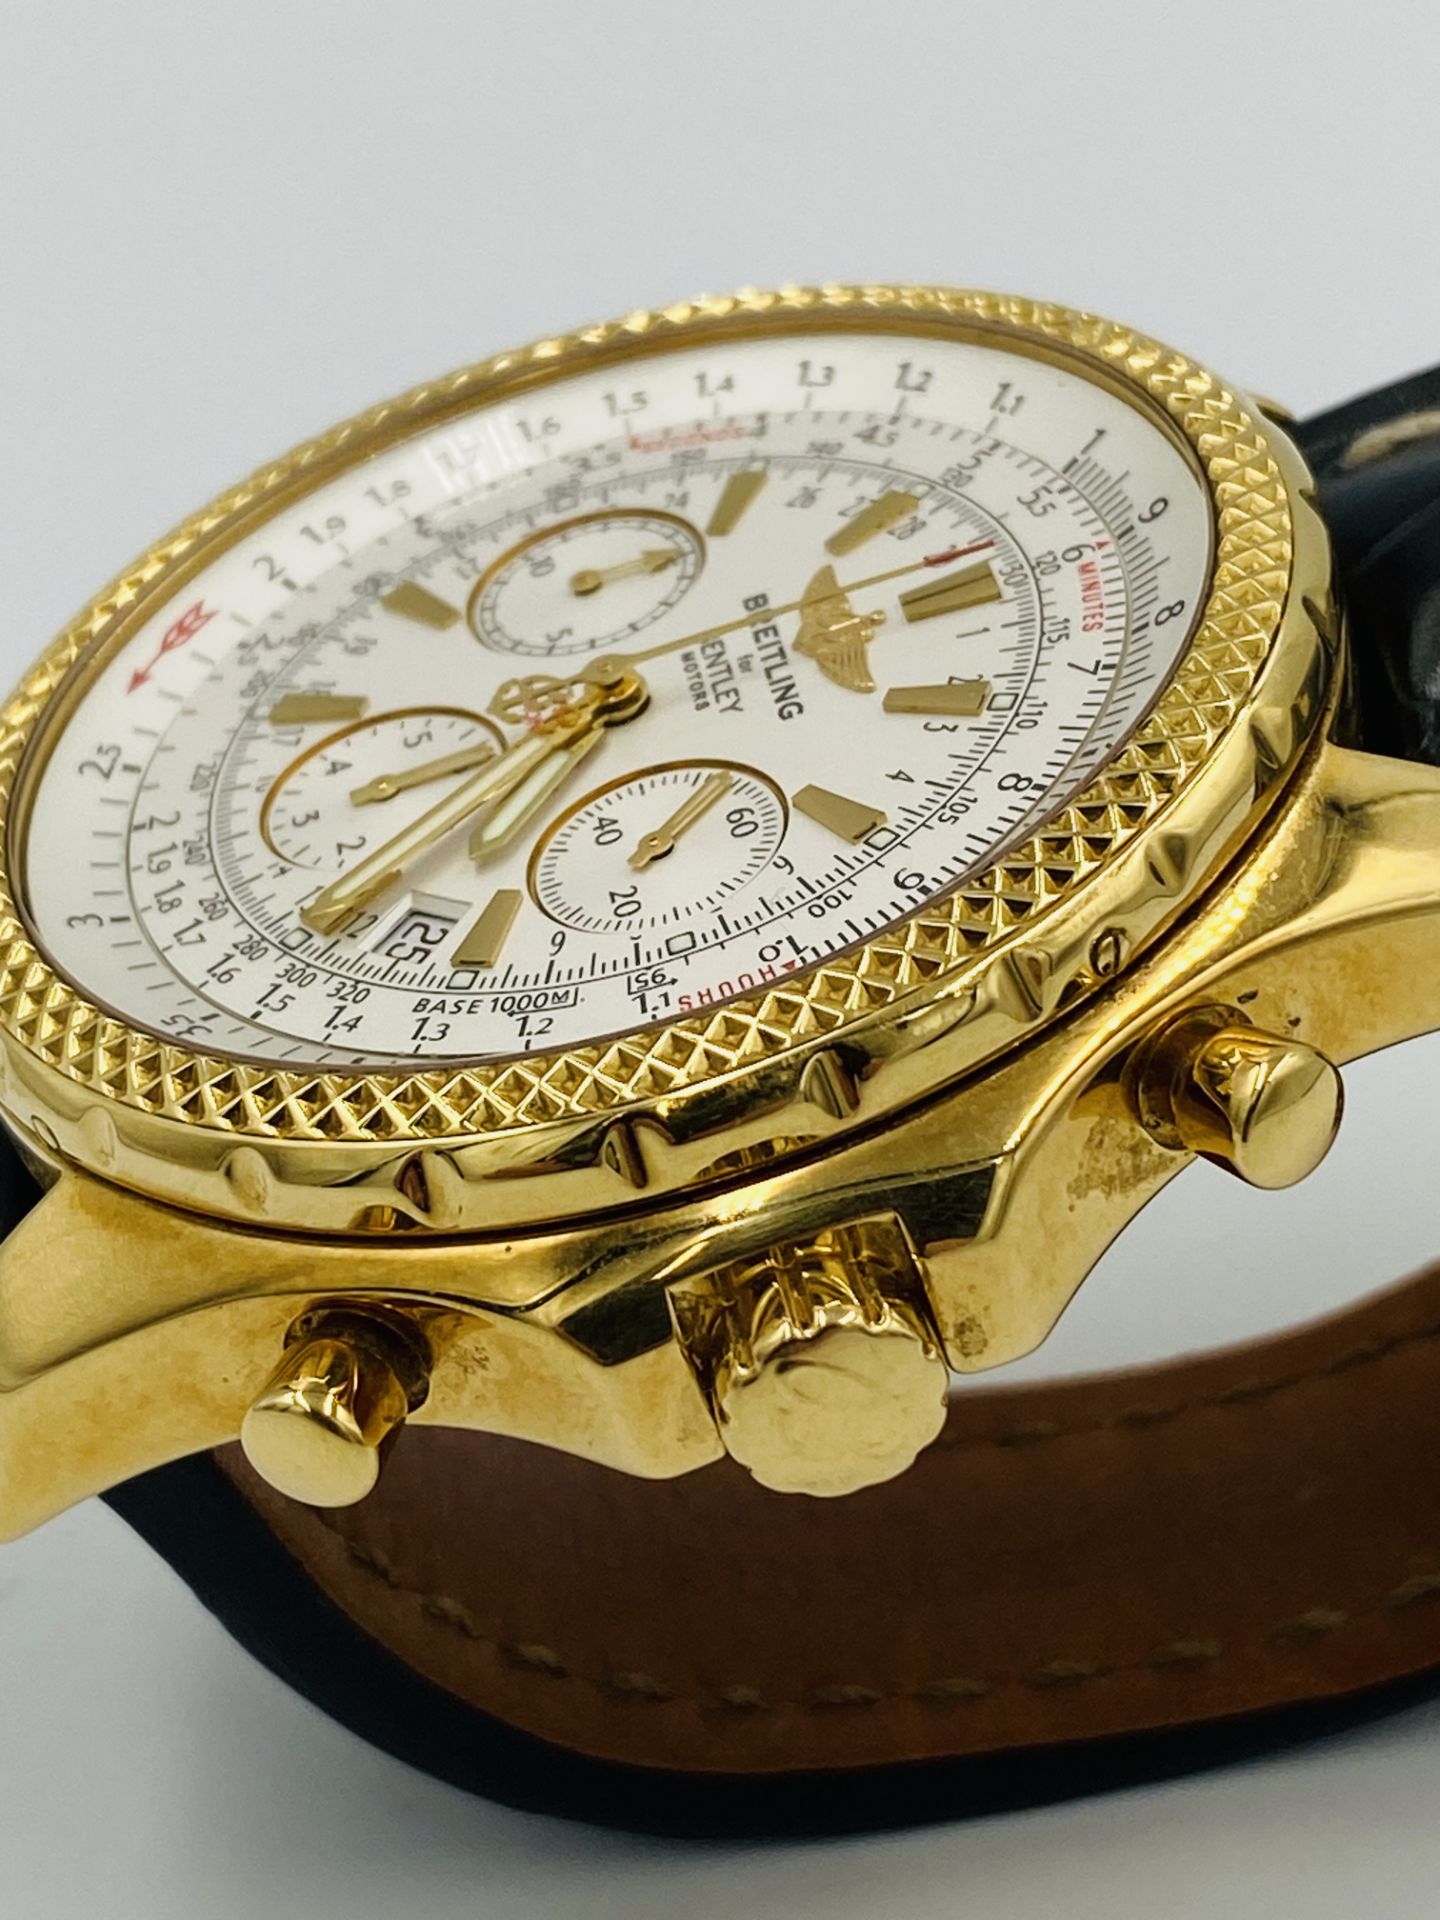 Breitling for Bentley. A Special Edition 18K gold automatic calendar chronograph wristwatch - Image 11 of 12